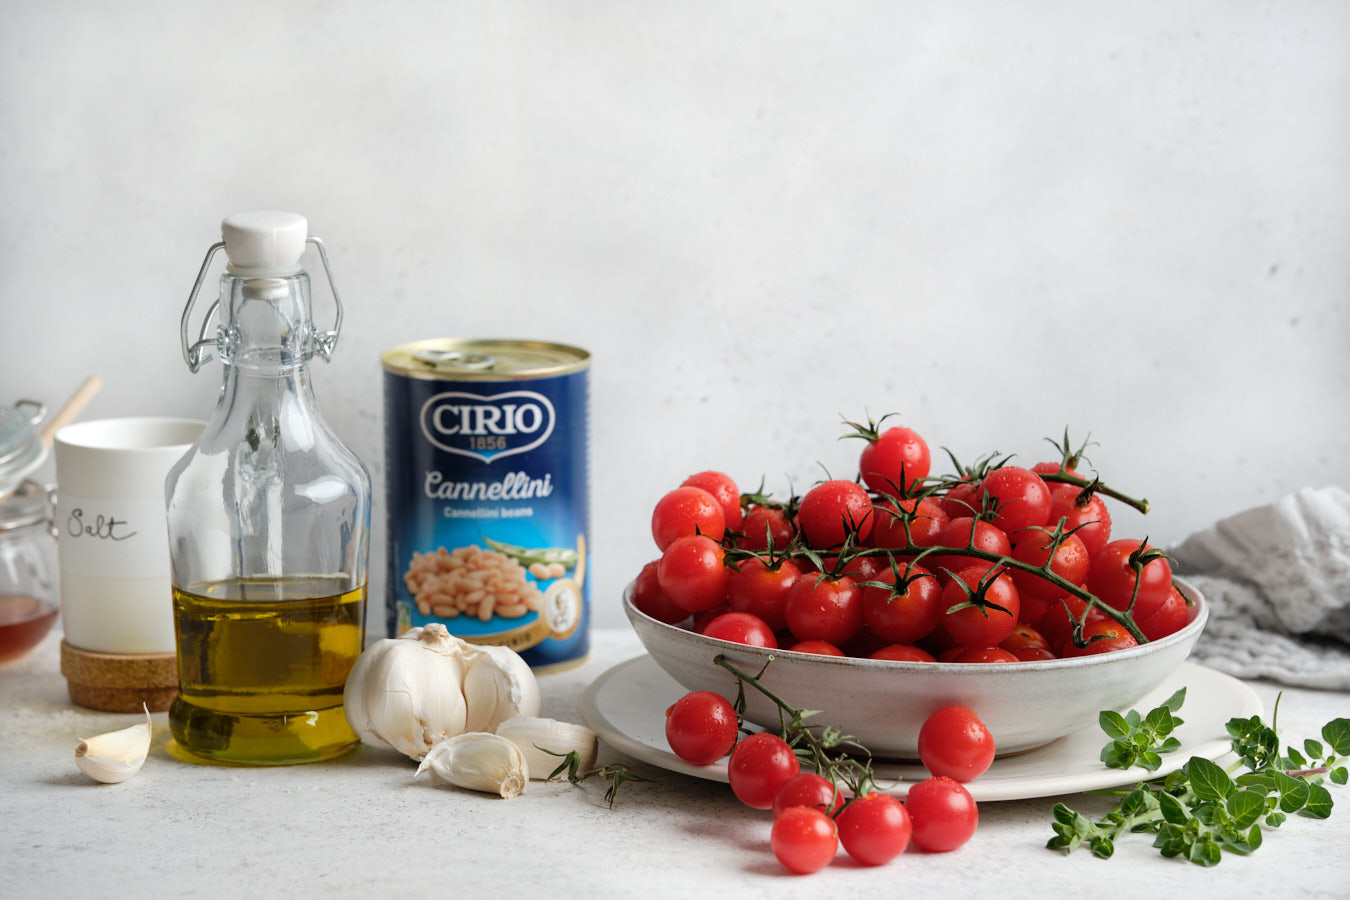 Ingredients for roasted cherry tomatoes with white beans, cannellini beans